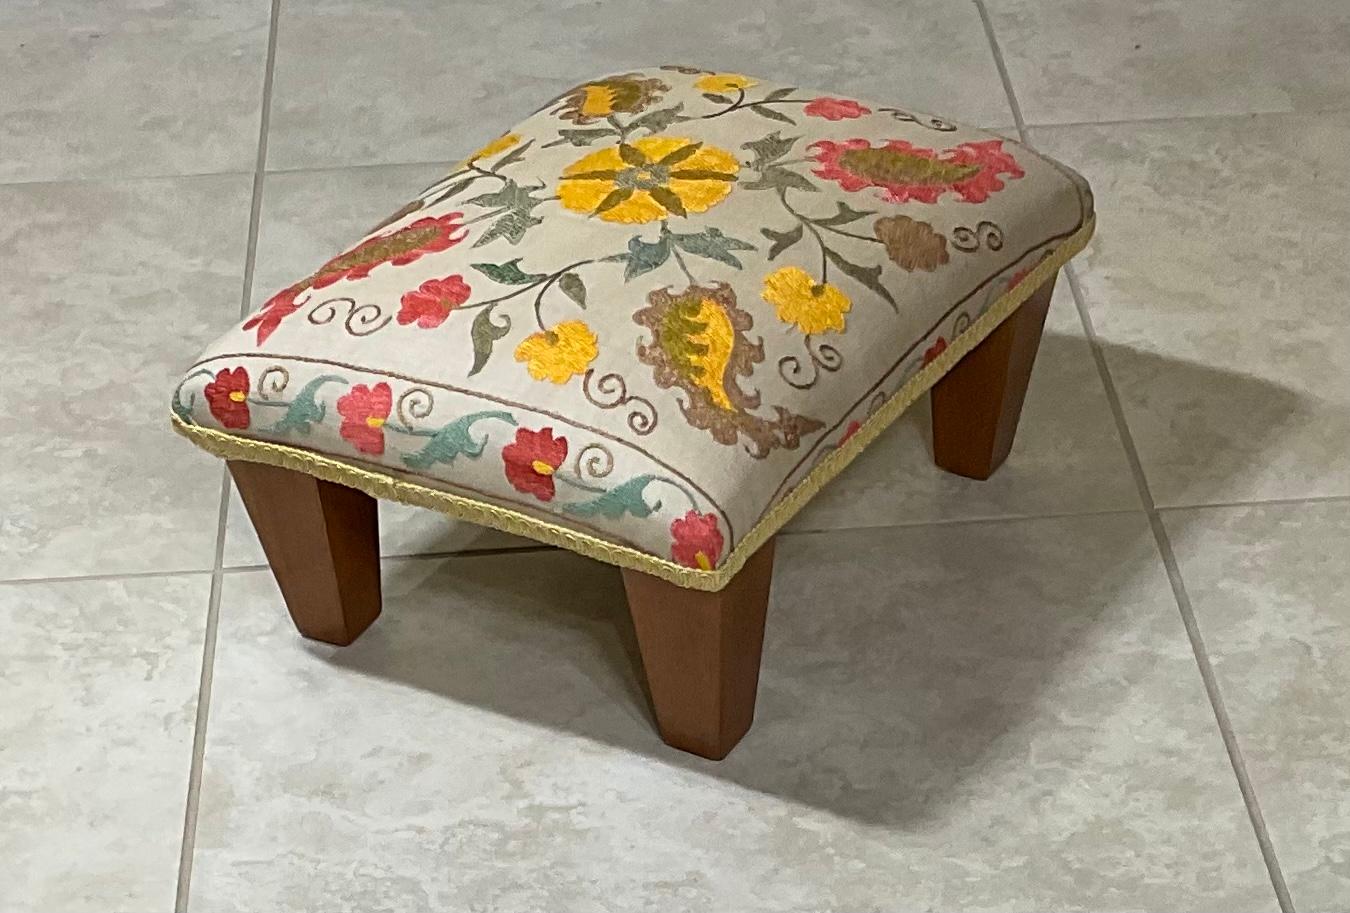 Elegant foot stool made wood, upholstered with beautiful vintage hand embroidery Suzani textile, decorative trimming all around, great decorative stool.
   